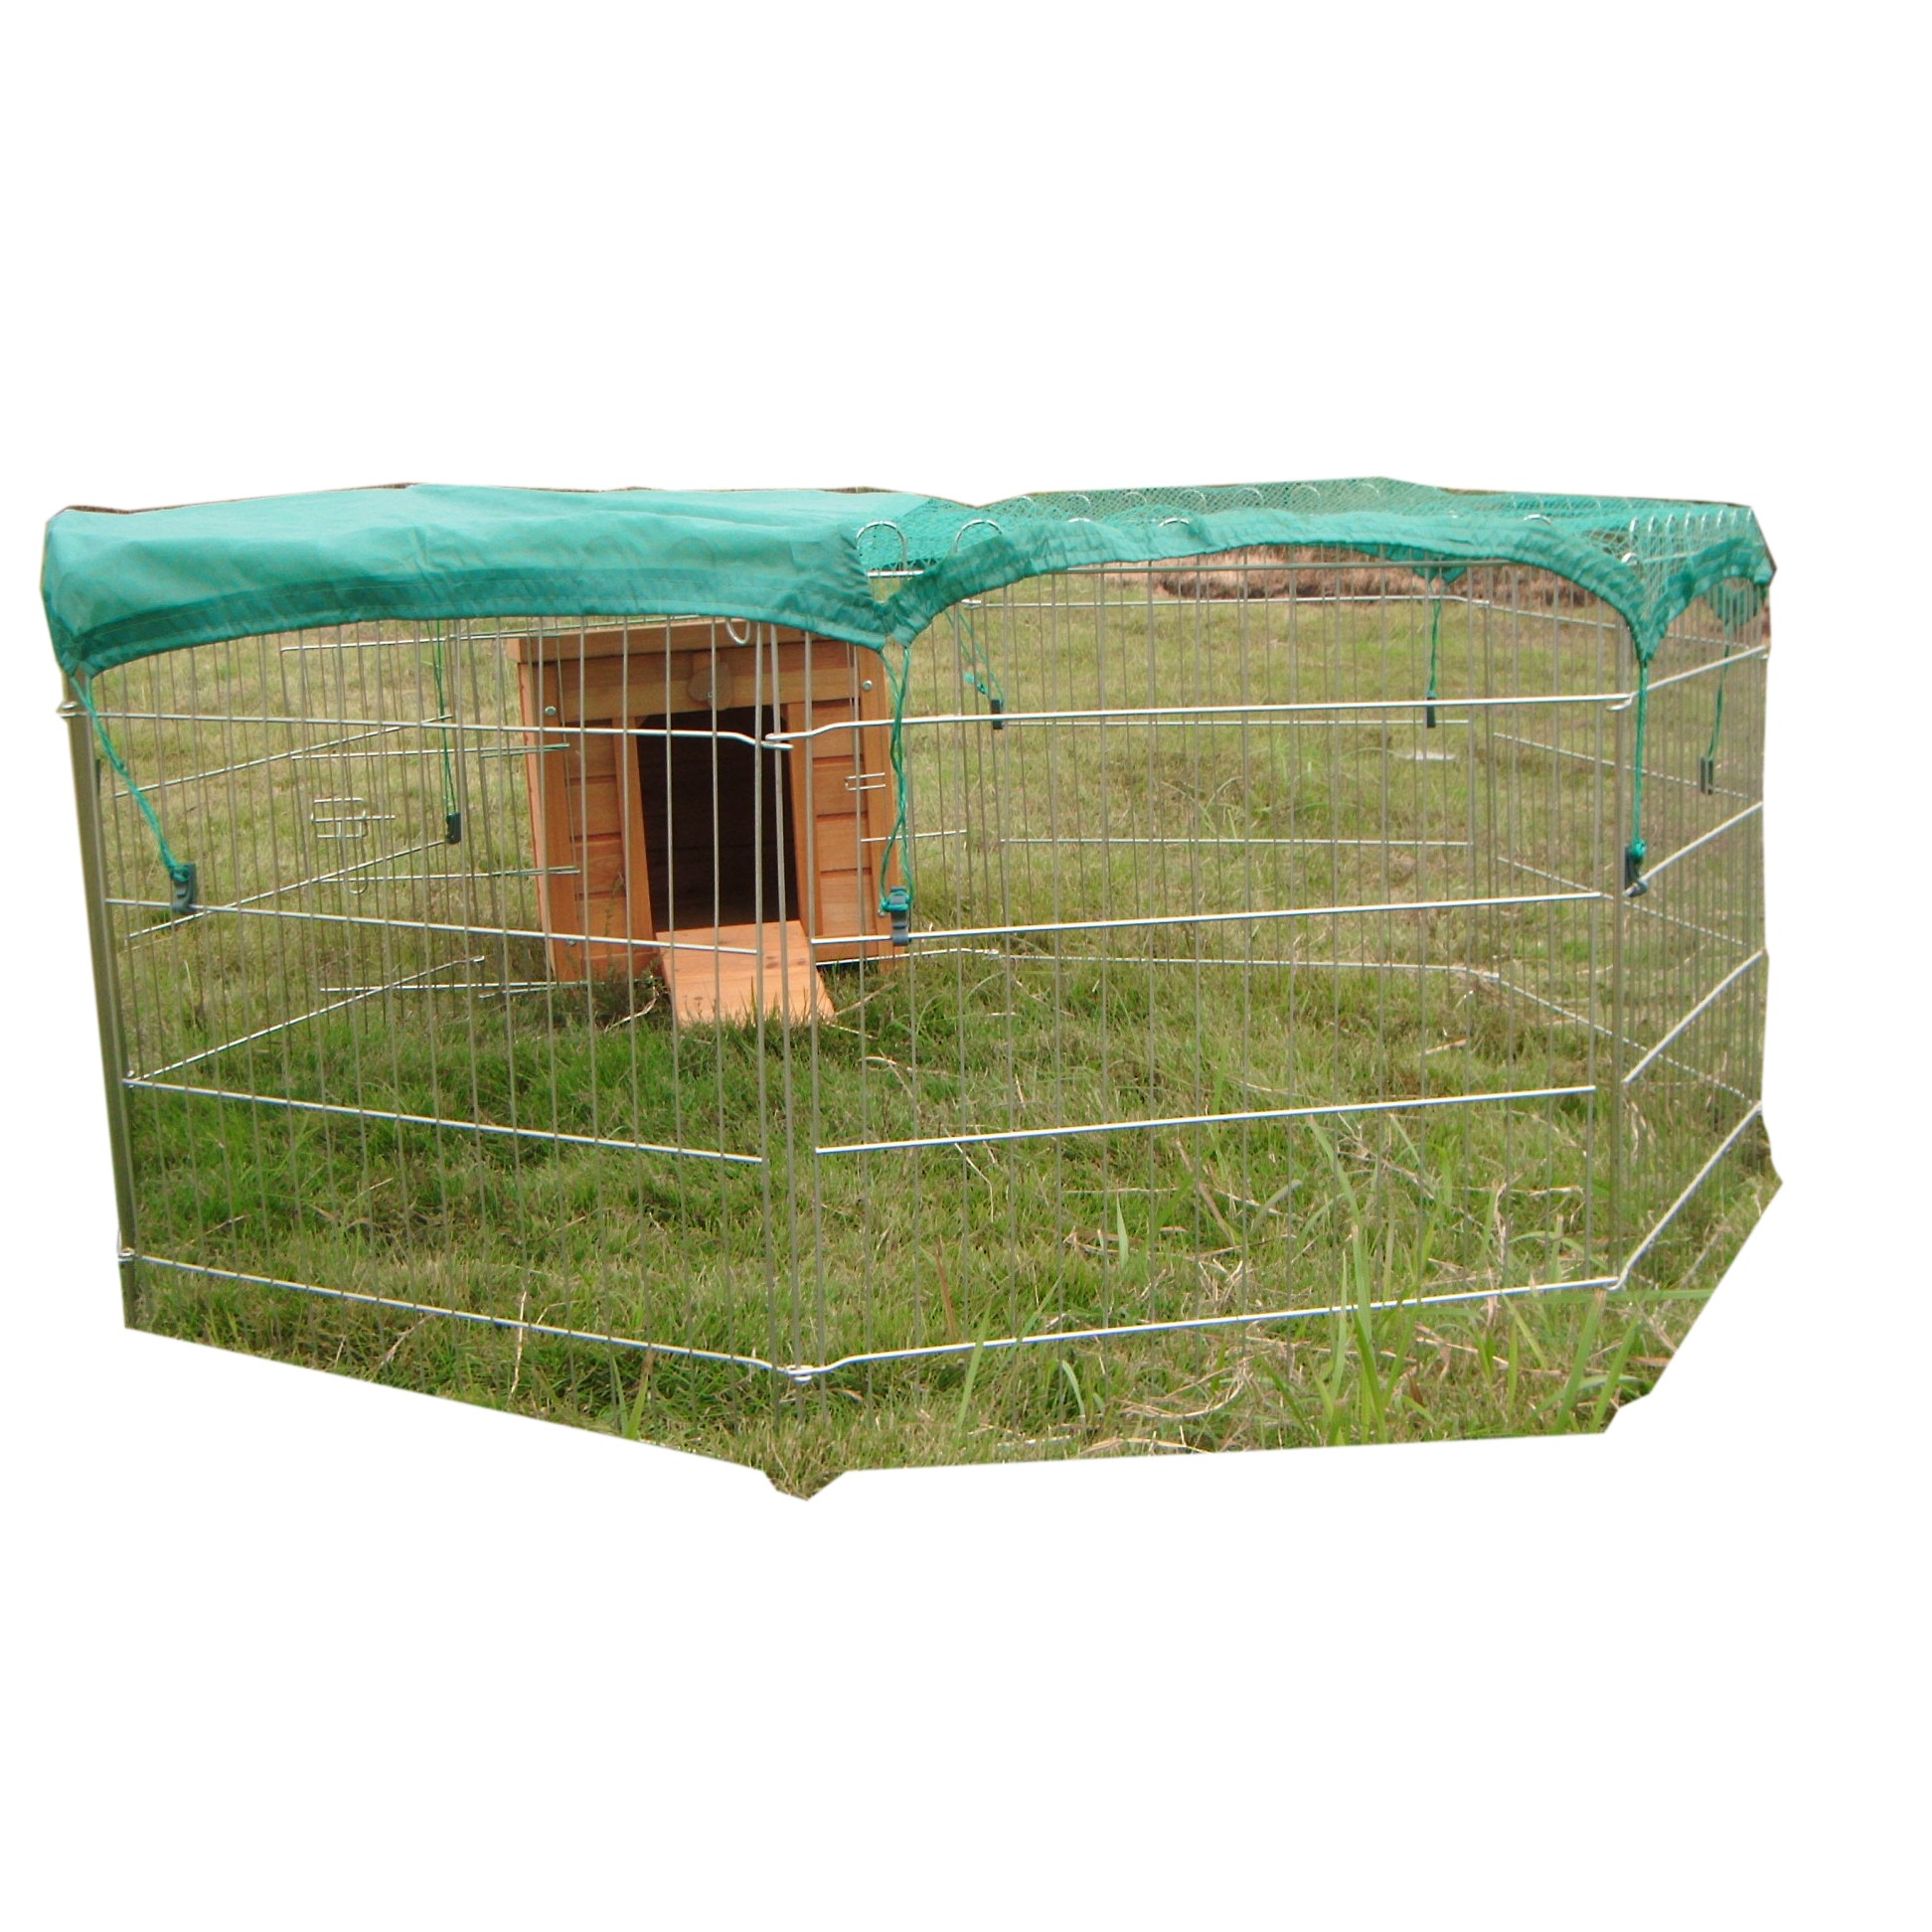 High definition Playhouse With Slide -
 1 x small hide house + 1 x Large Outdoor Octagon 55-inch pet Playpen Enclosure for Rabbit Puppy hutch wire animal Run Cages – Easy